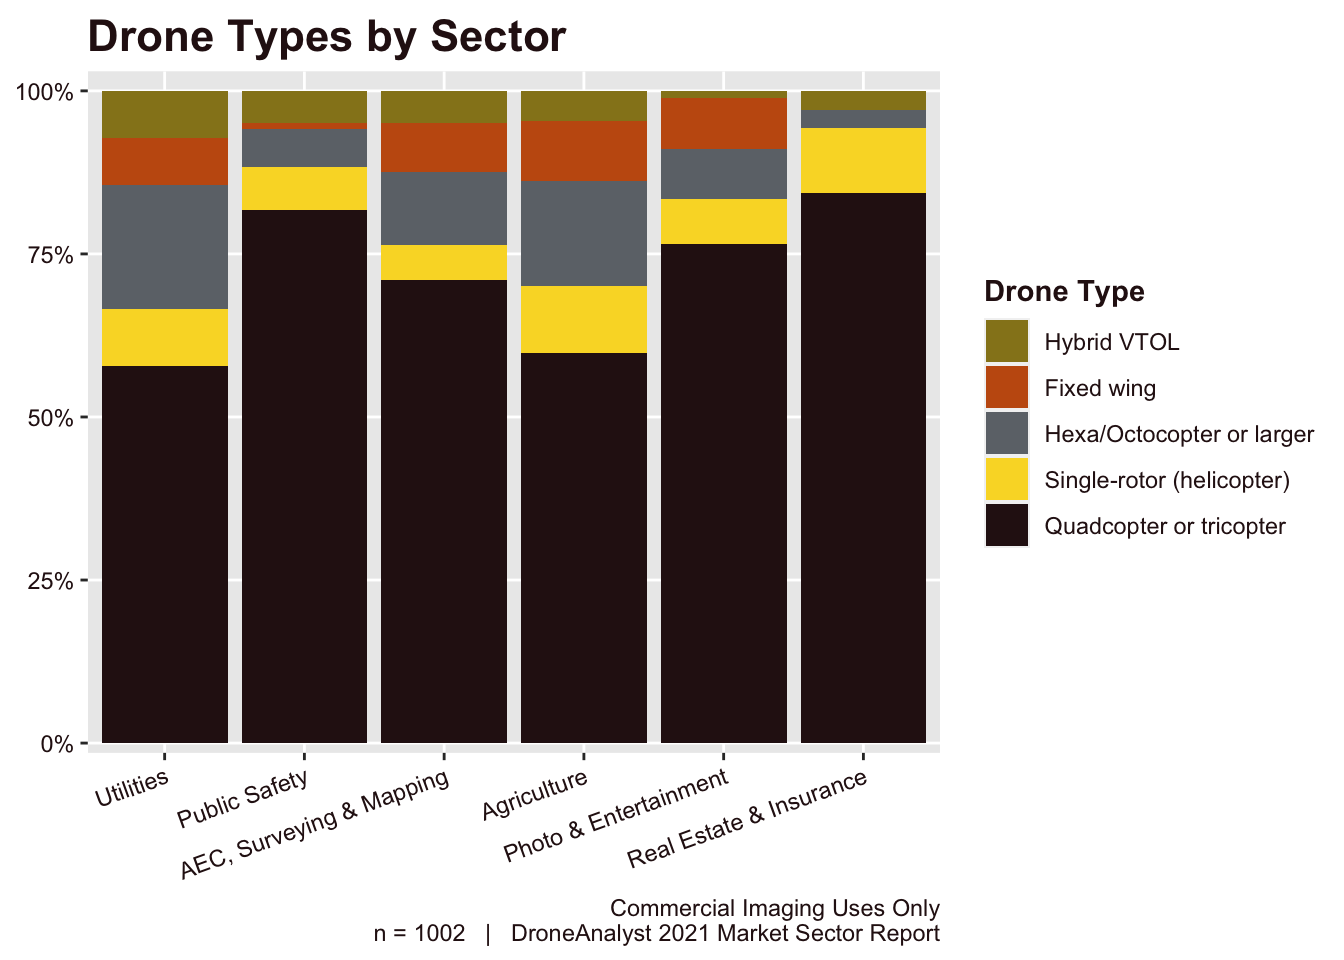 Drone Types by Sector